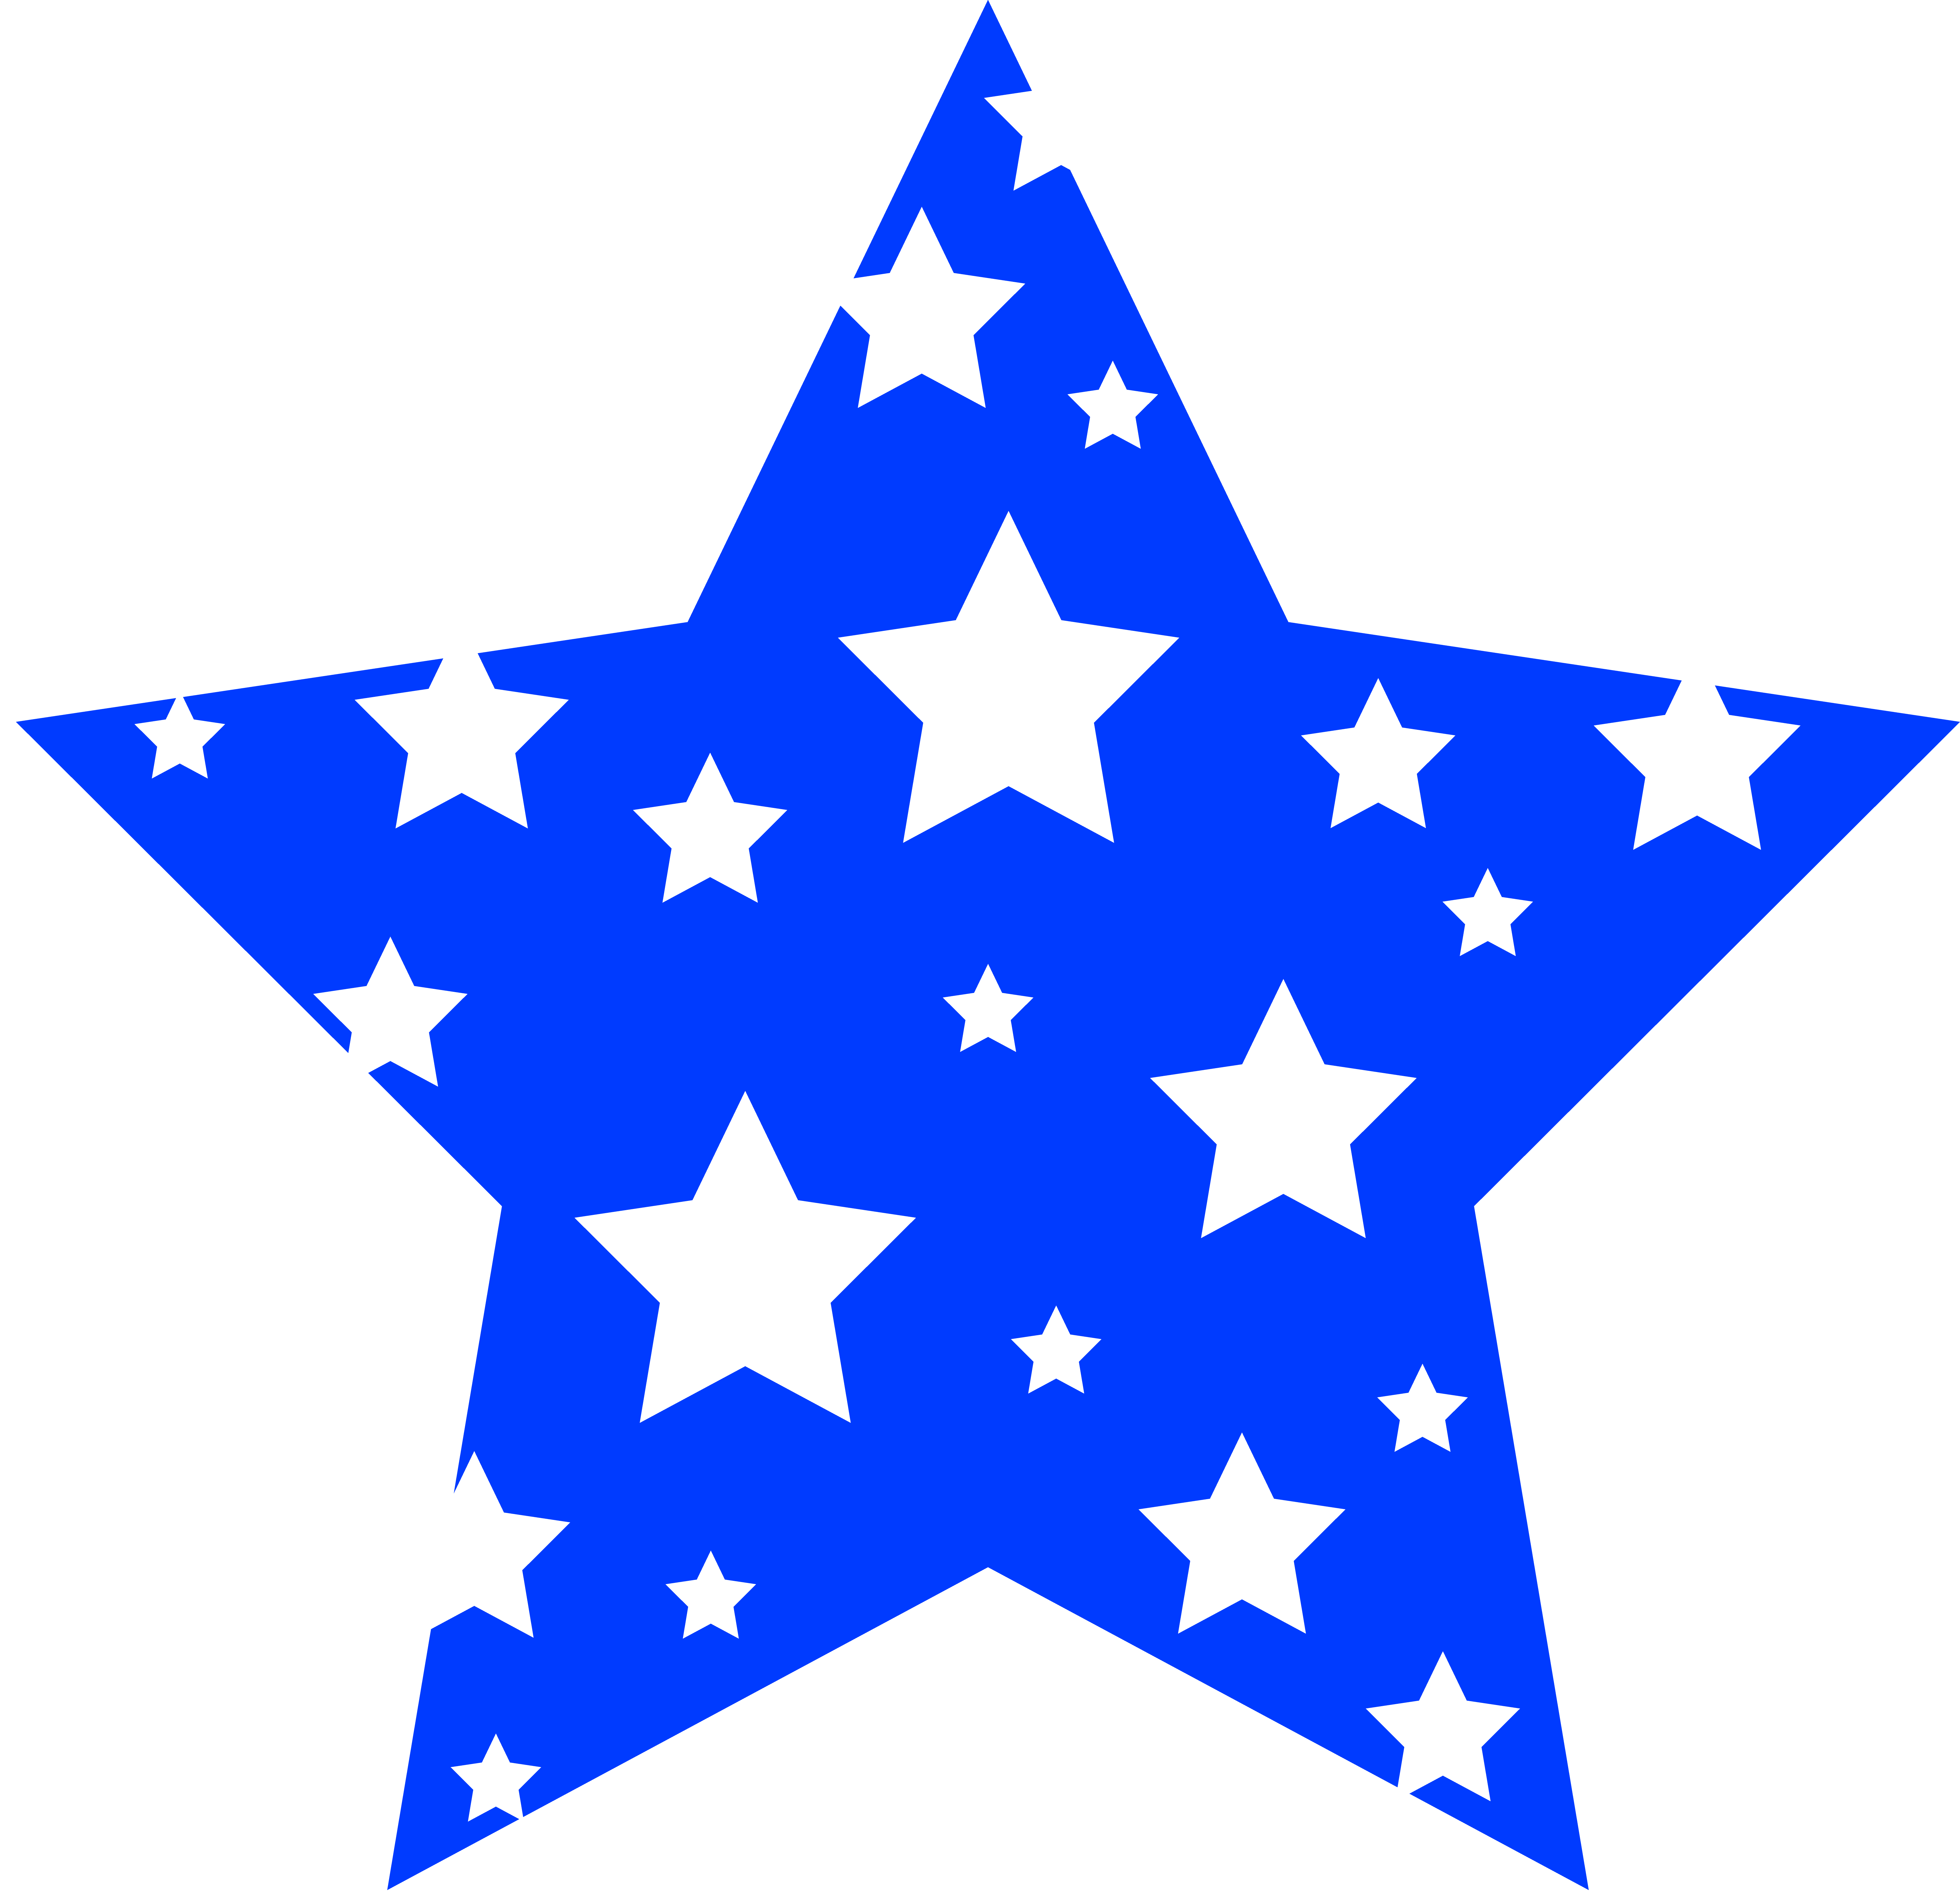 Blue and White Star Logo - Free Pictures Of Blue Stars, Download Free Clip Art, Free Clip Art ...